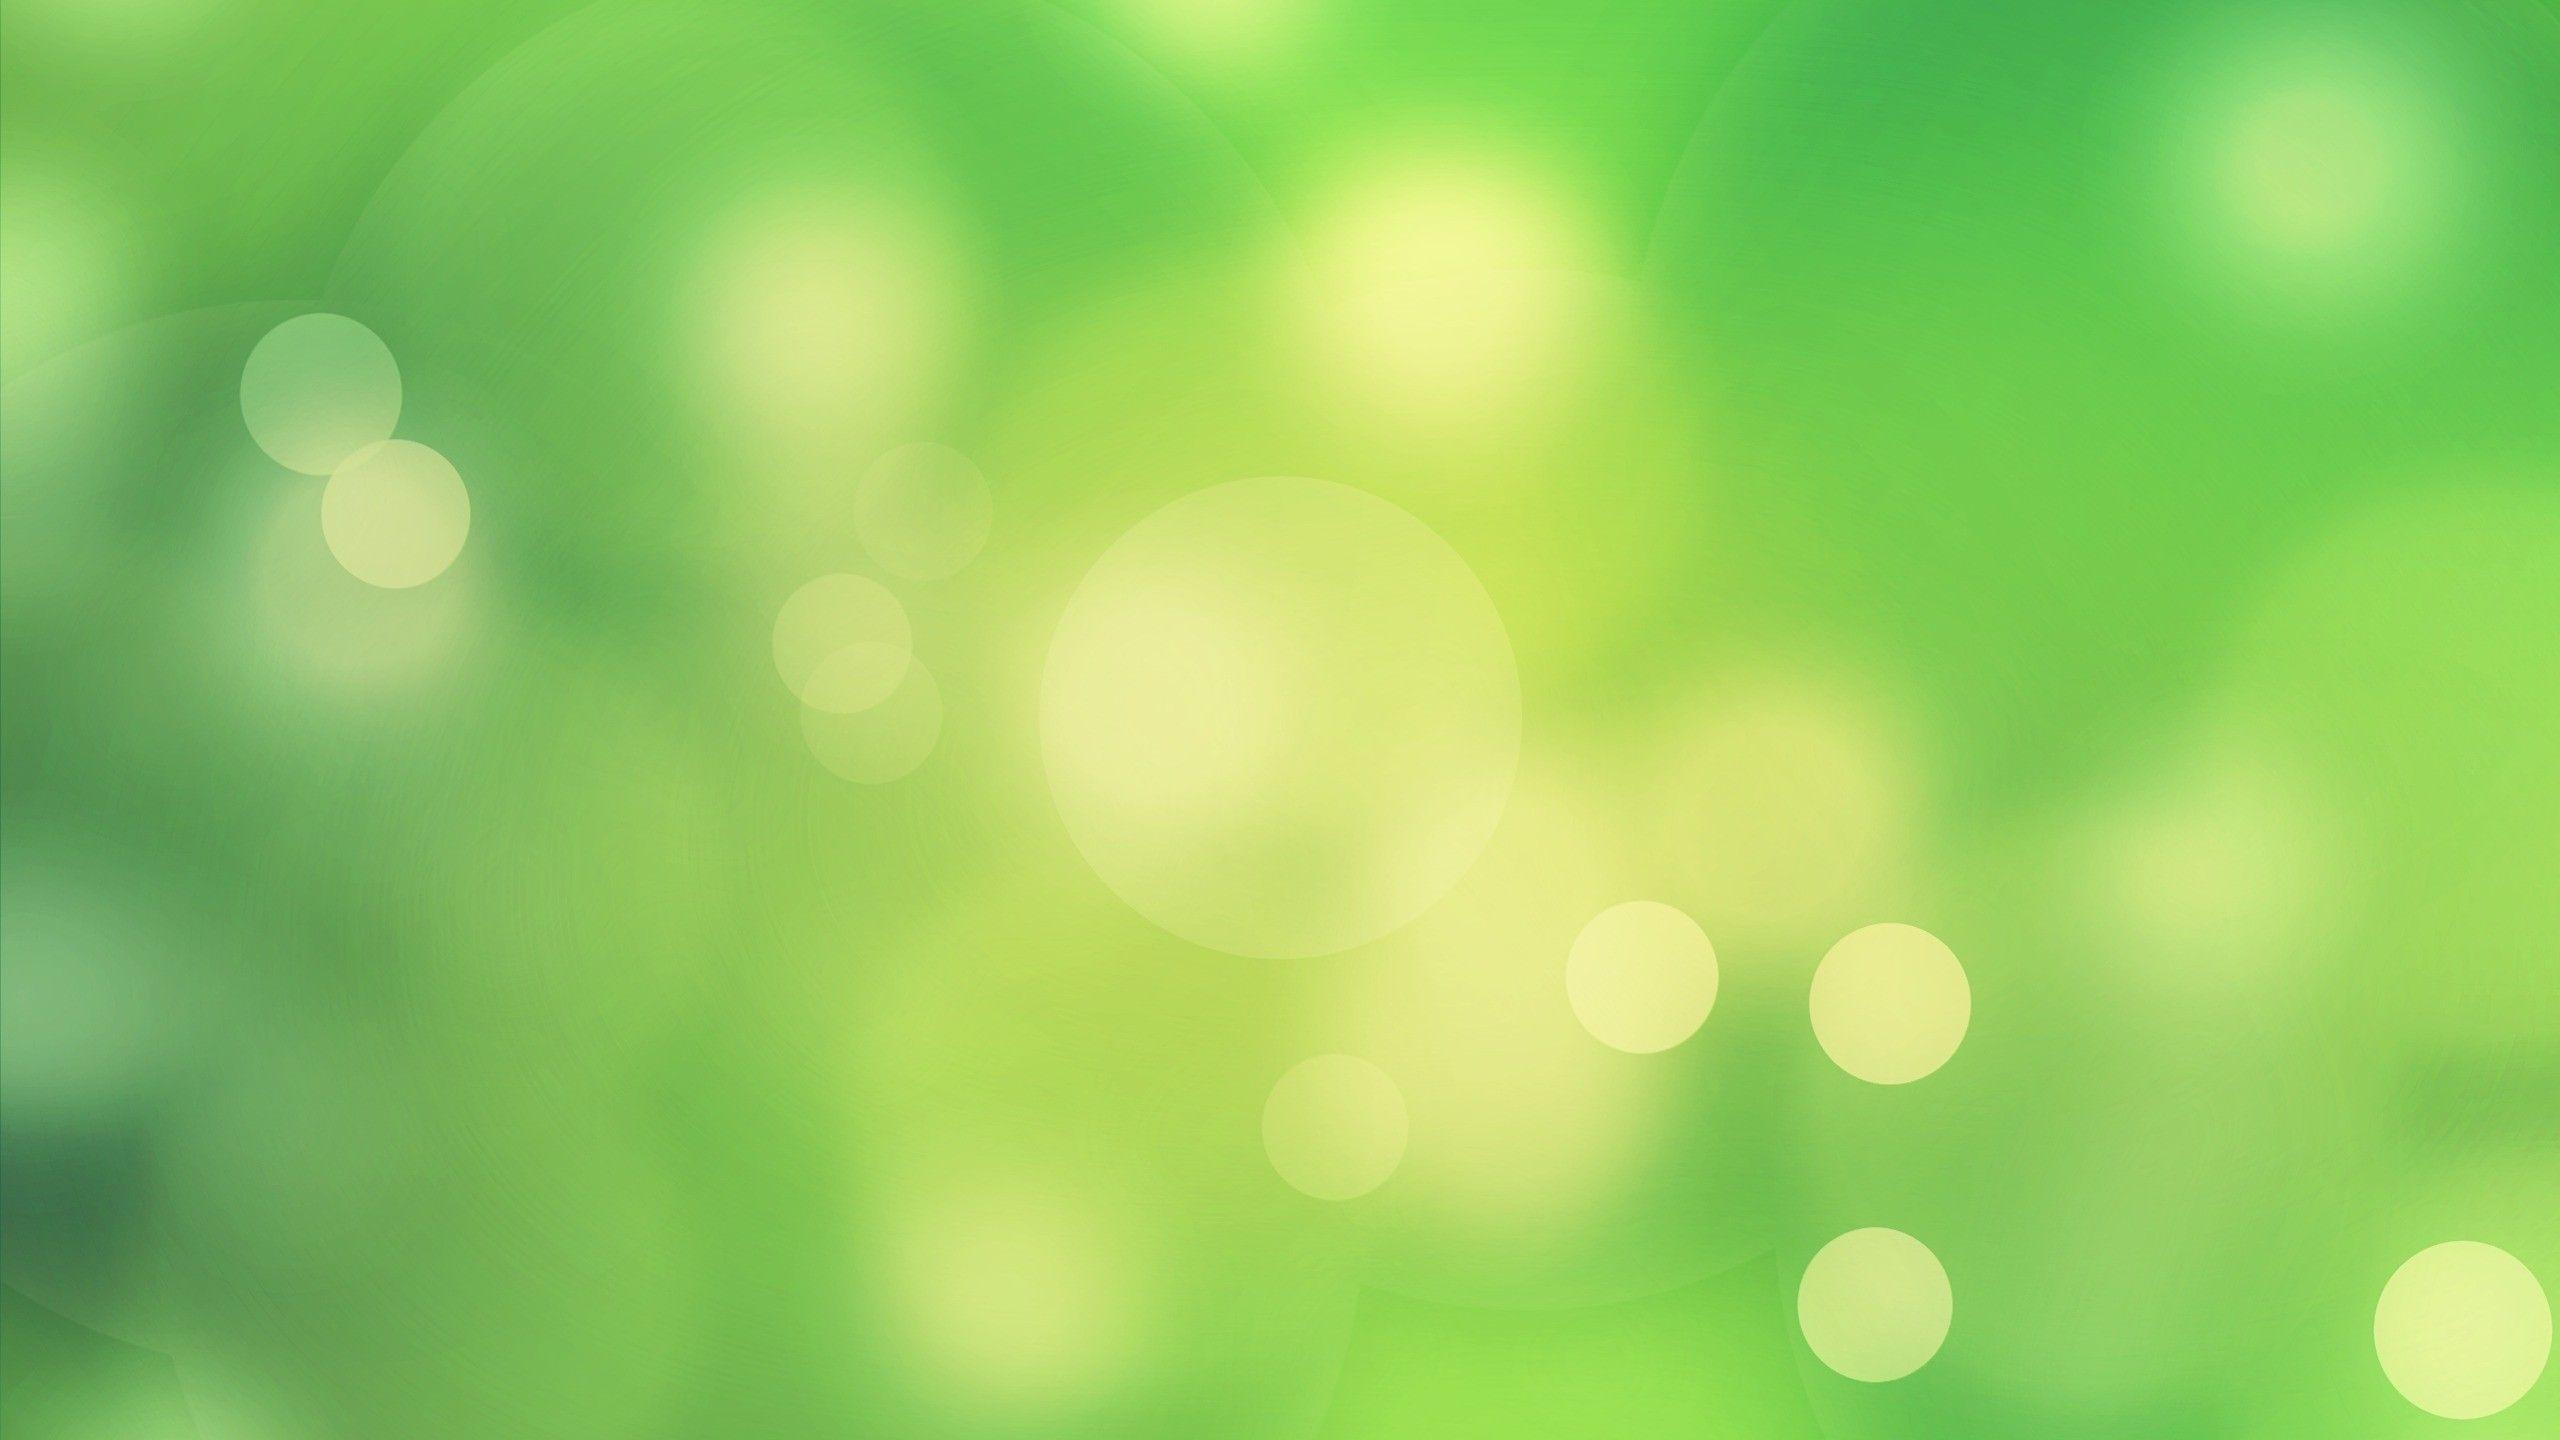 13+ Top Light Green Background Images - Complete Background Collection